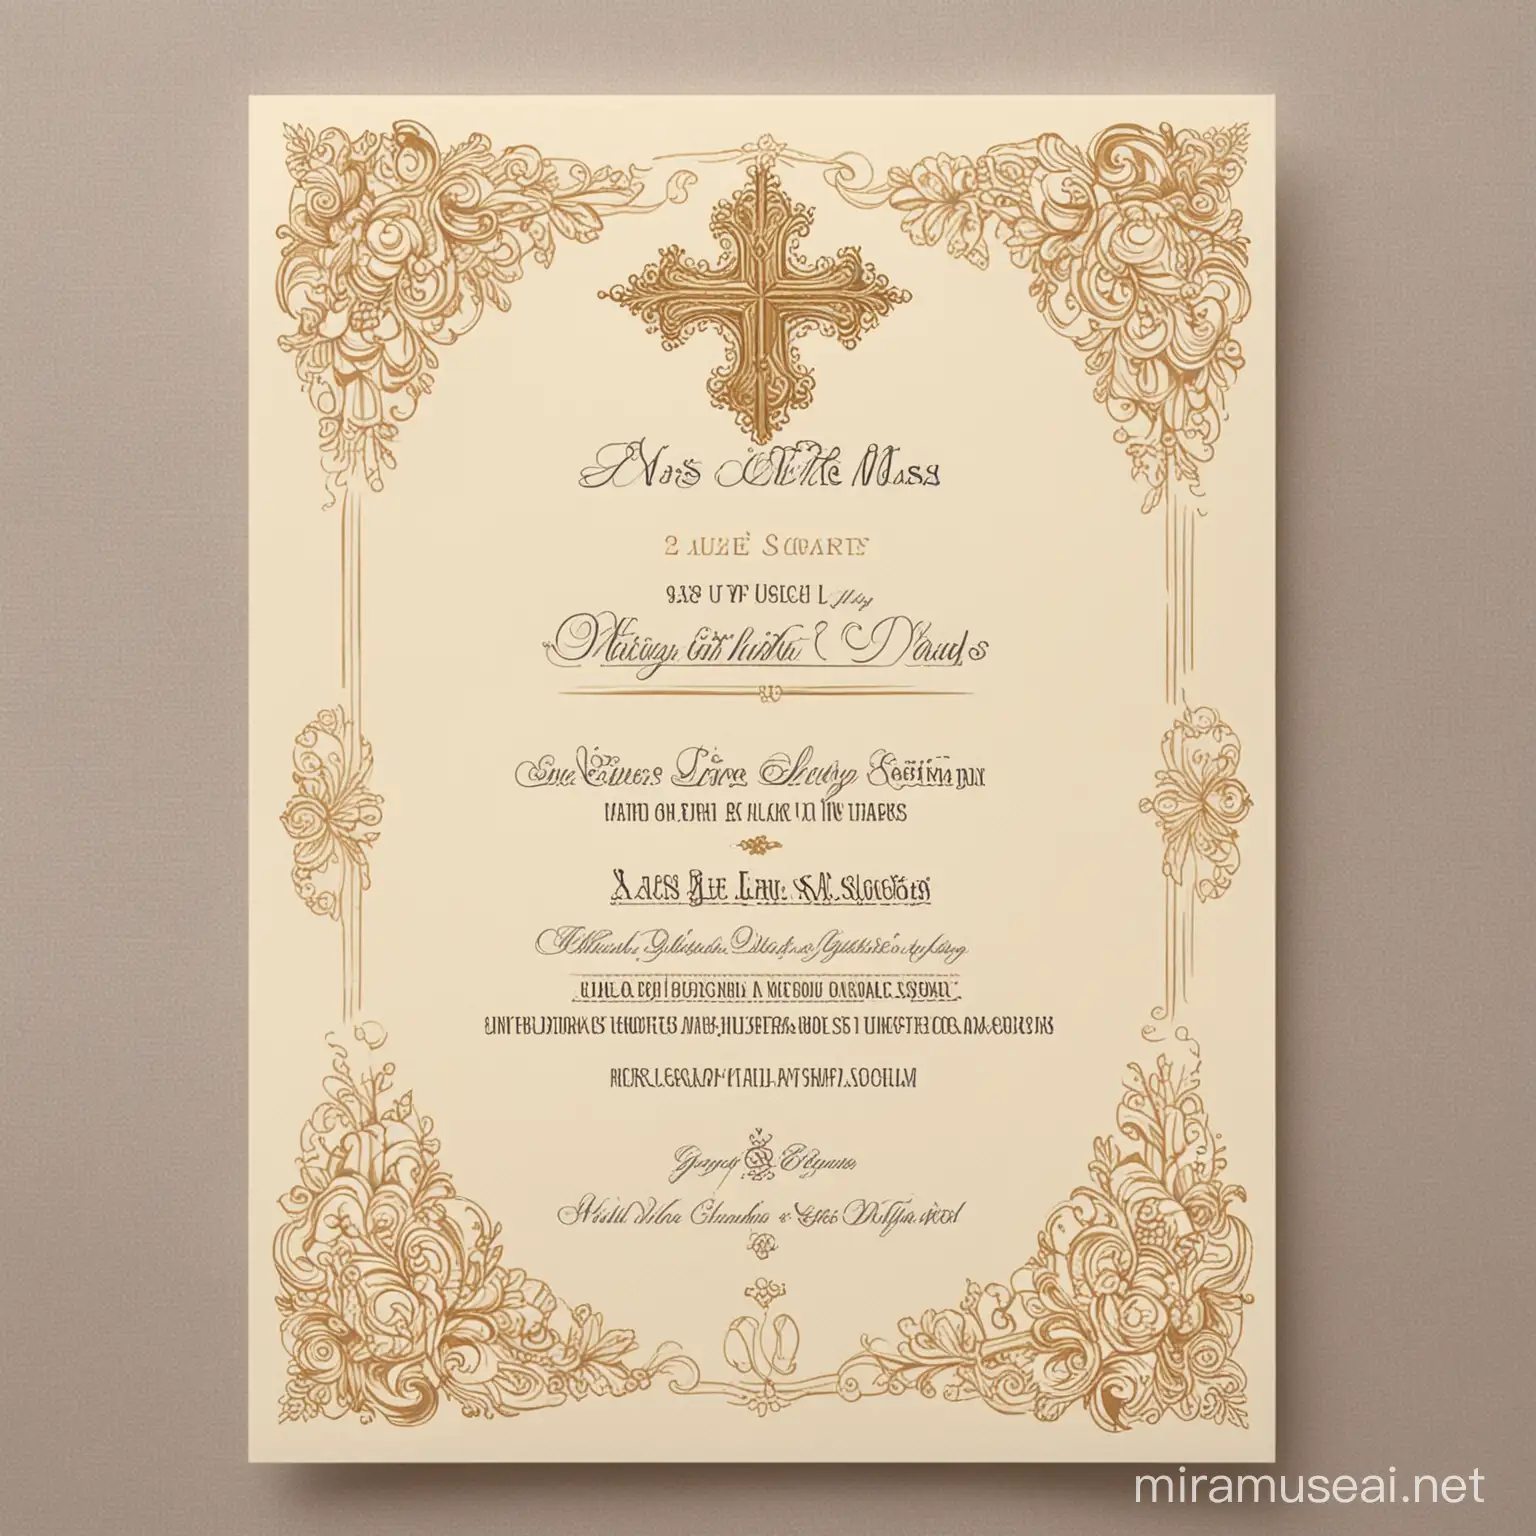 Elegant Mass Invitation Card with Ornate Design and Sophisticated Typography